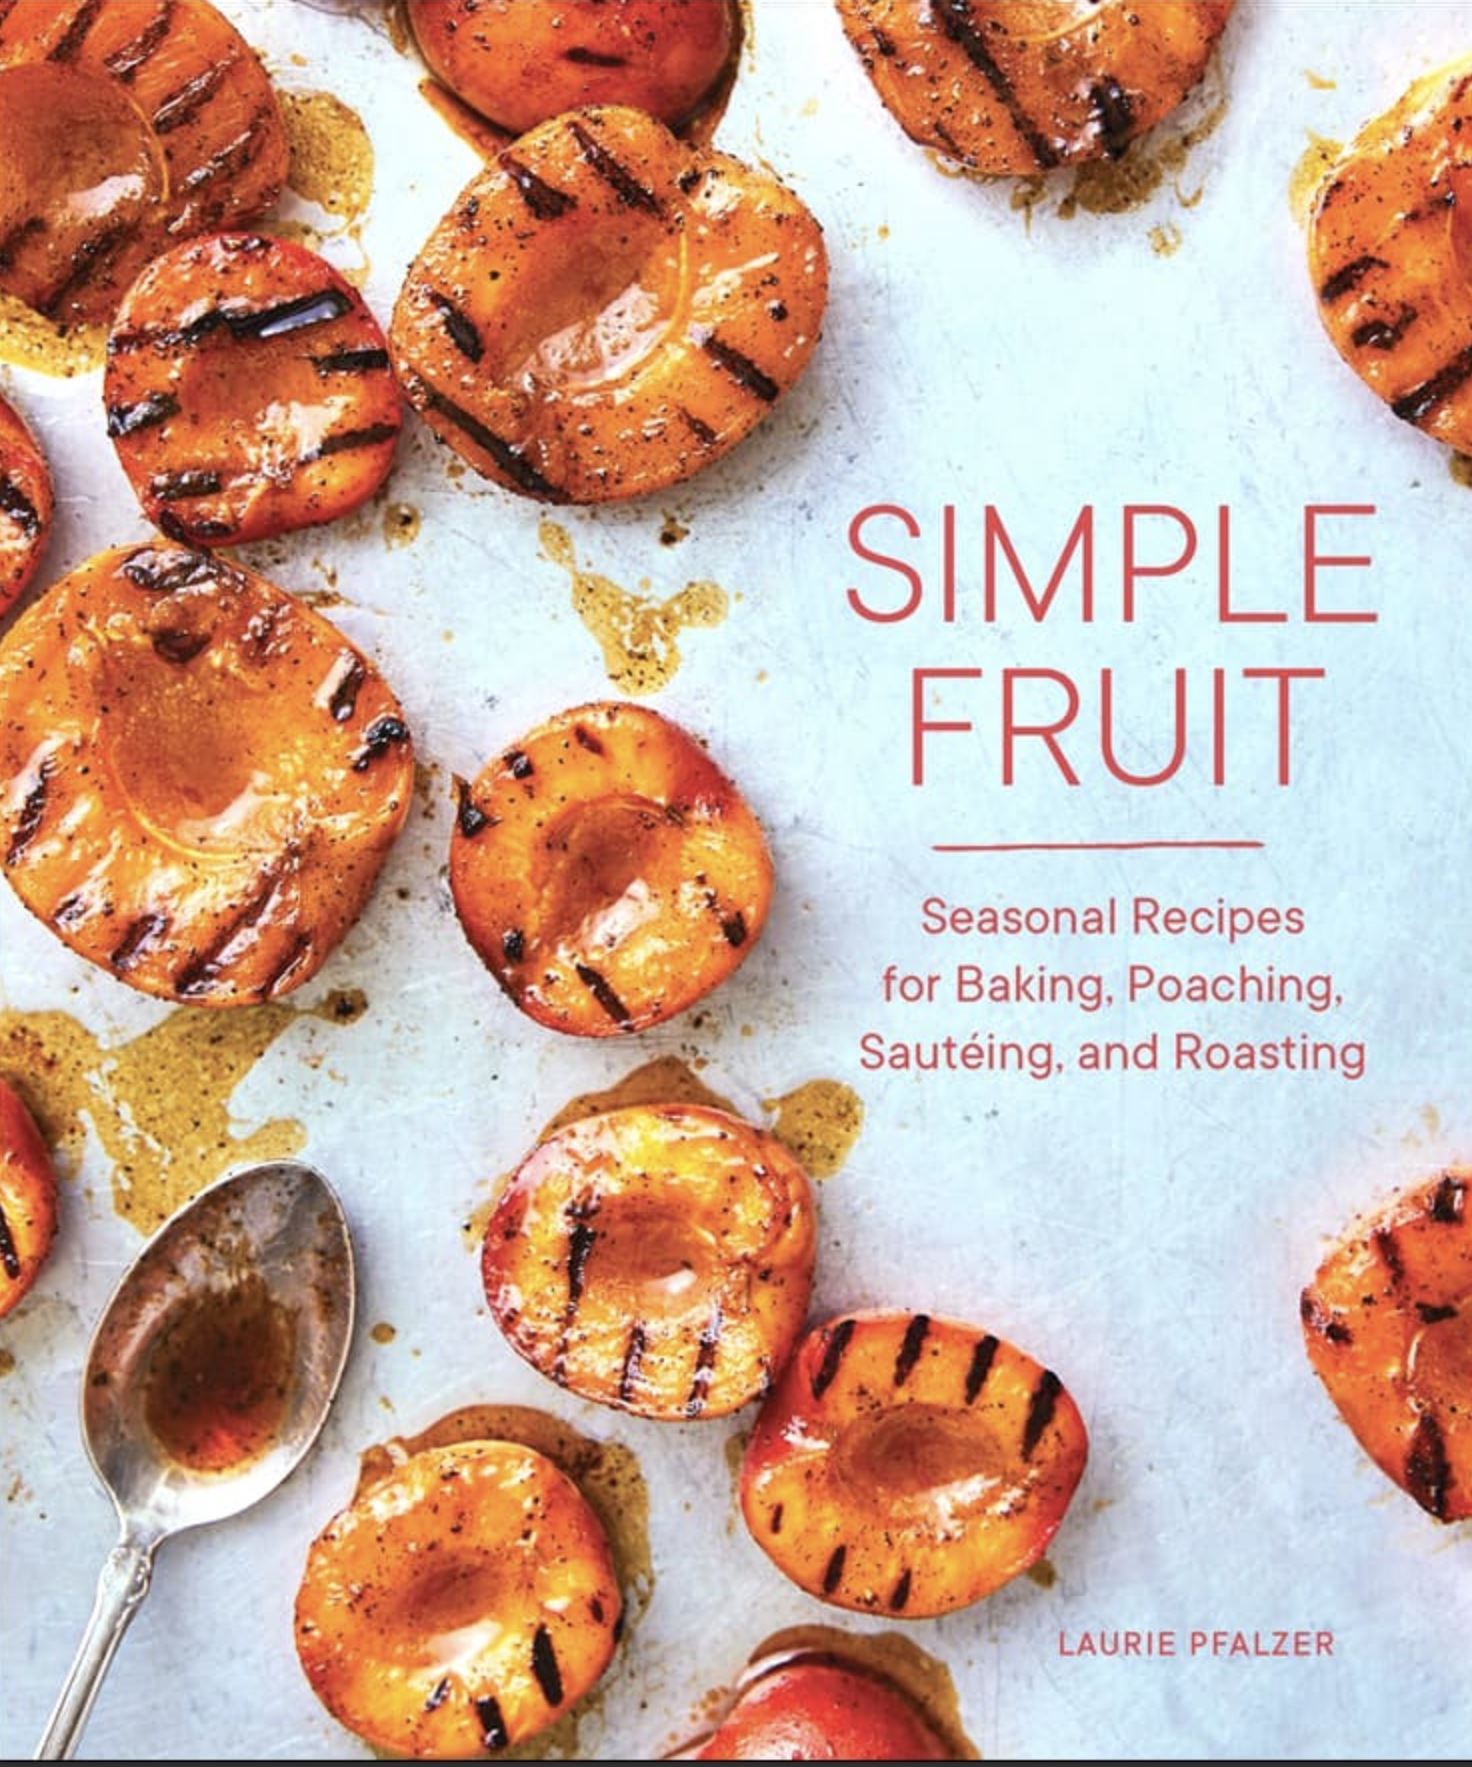 9781632172372 Image 00 Simple Fruit Seasonal Recipes for Baking, Poaching, Sautéing, and Roasting Laurie Pfalzer